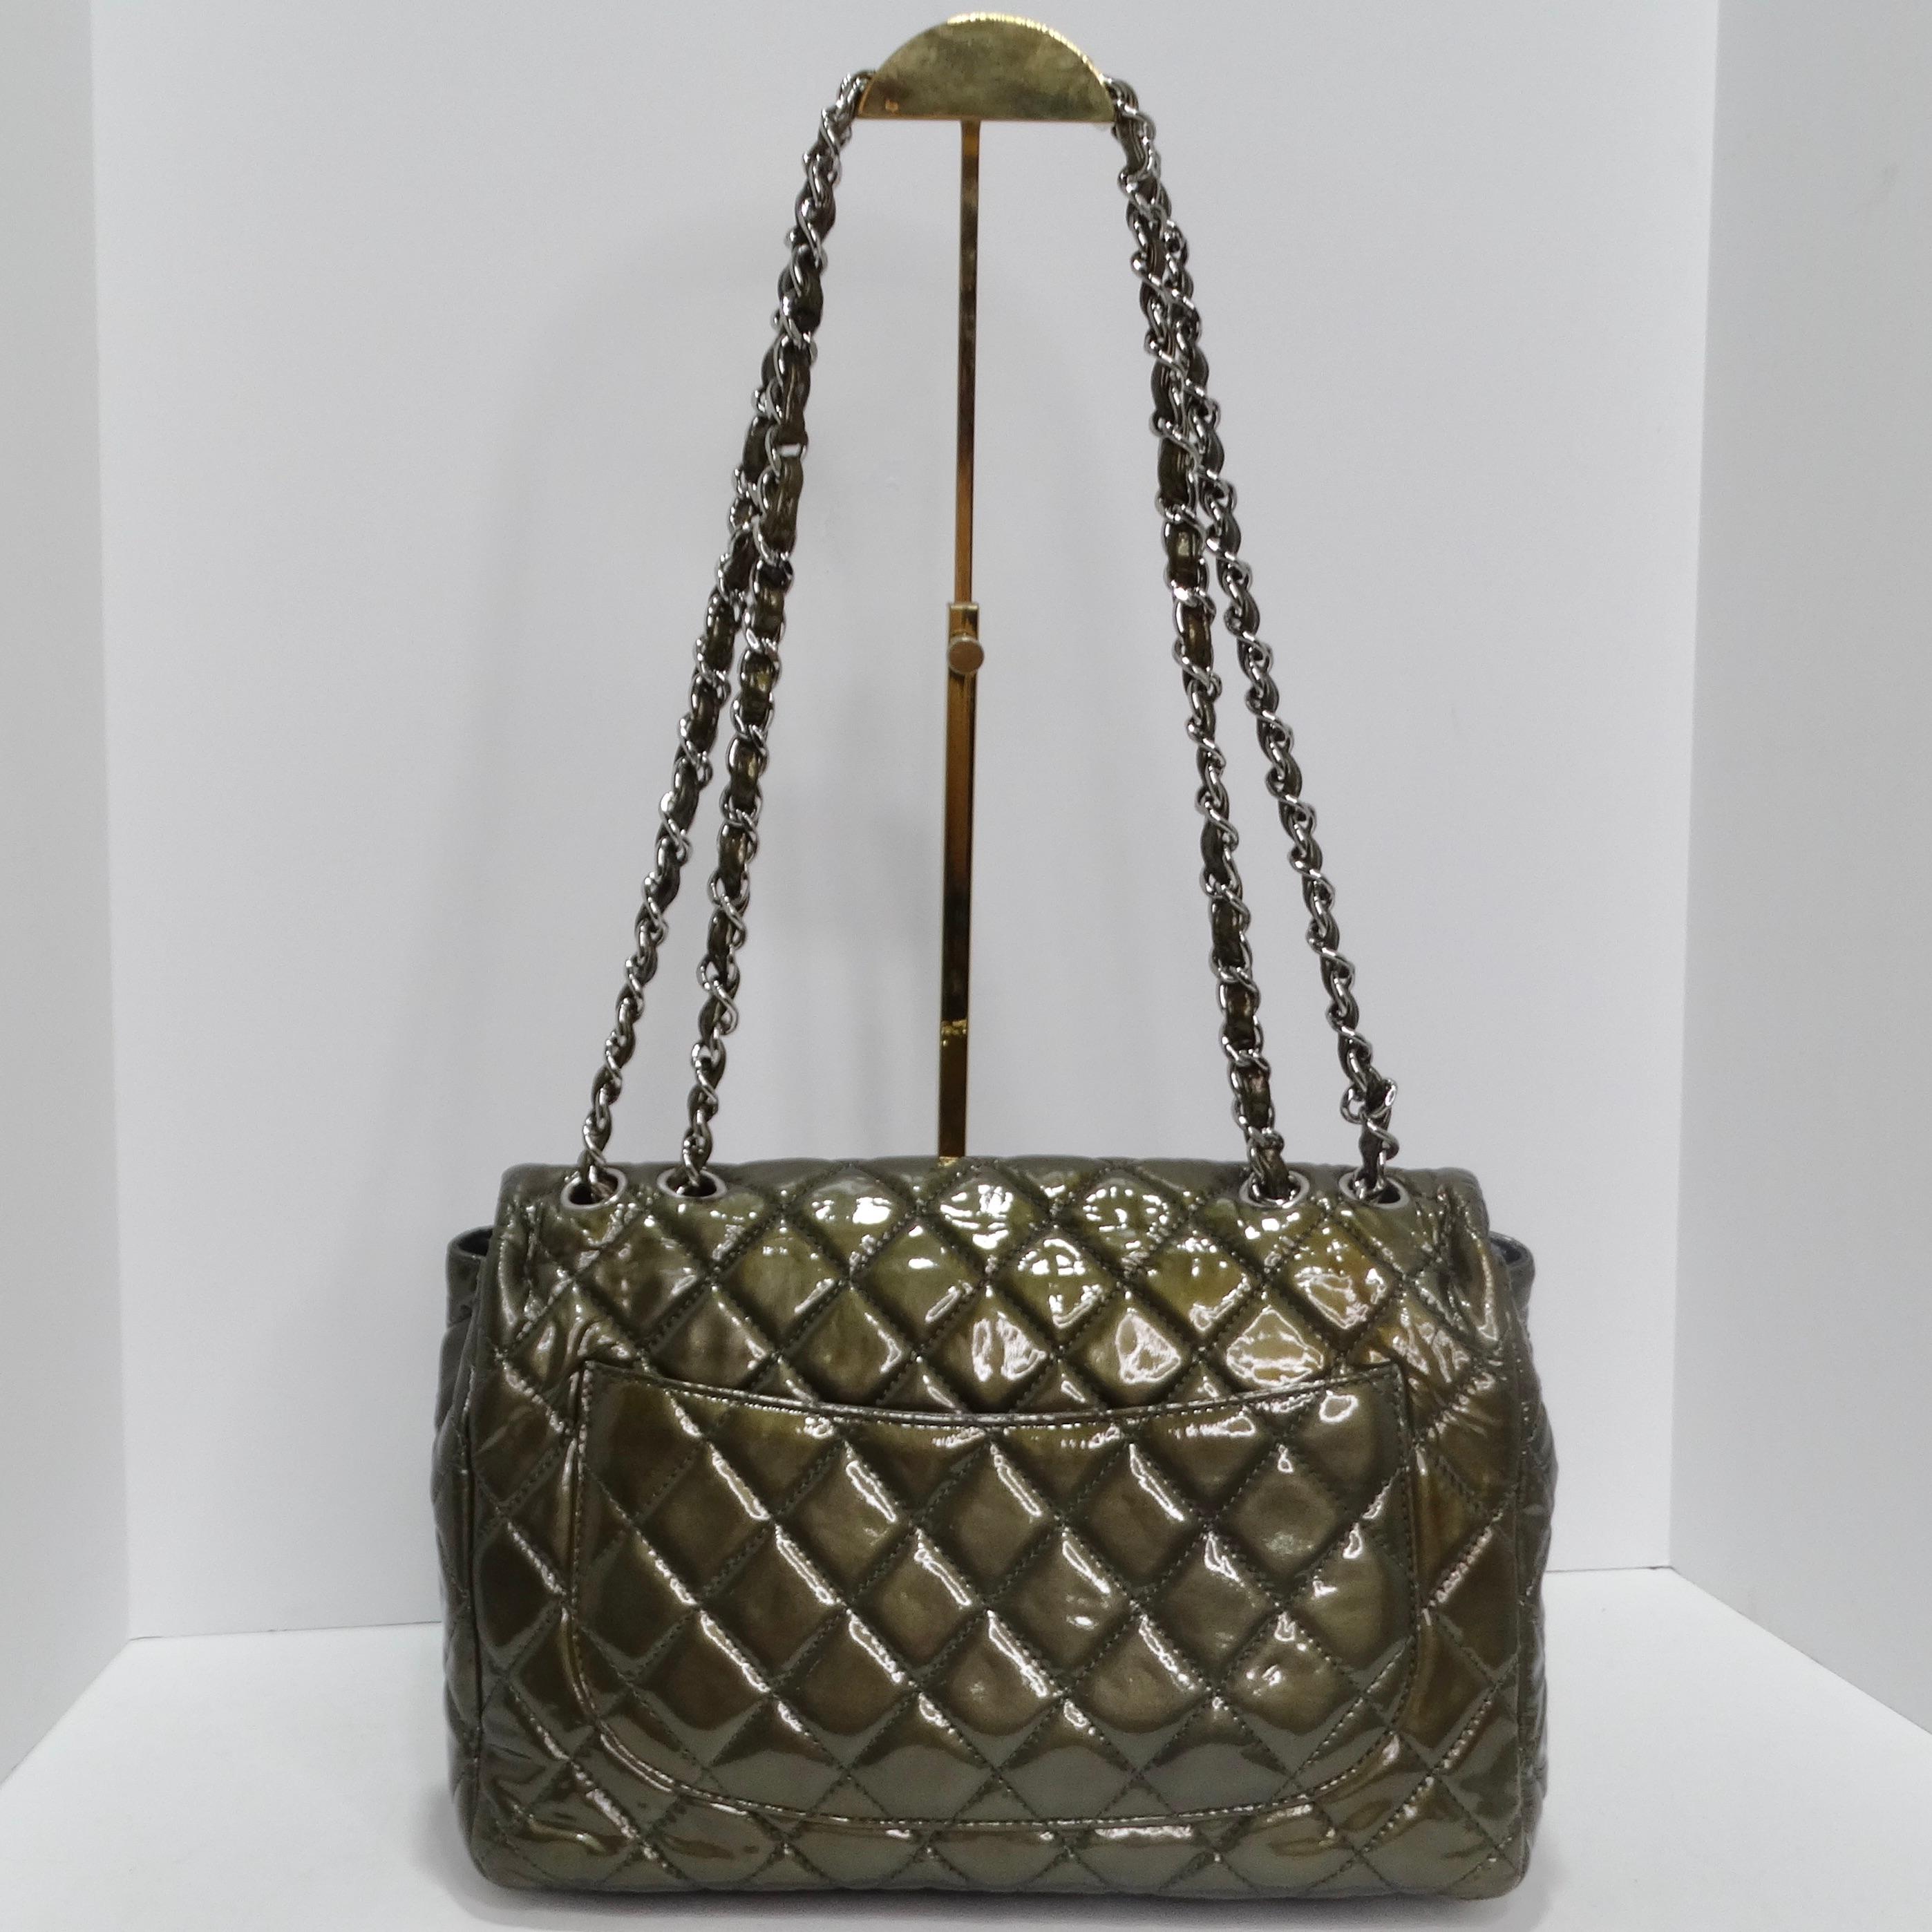 Chanel 2008-2009 Metallic Patent Quilted Jumbo Single Flap Green In Excellent Condition For Sale In Scottsdale, AZ